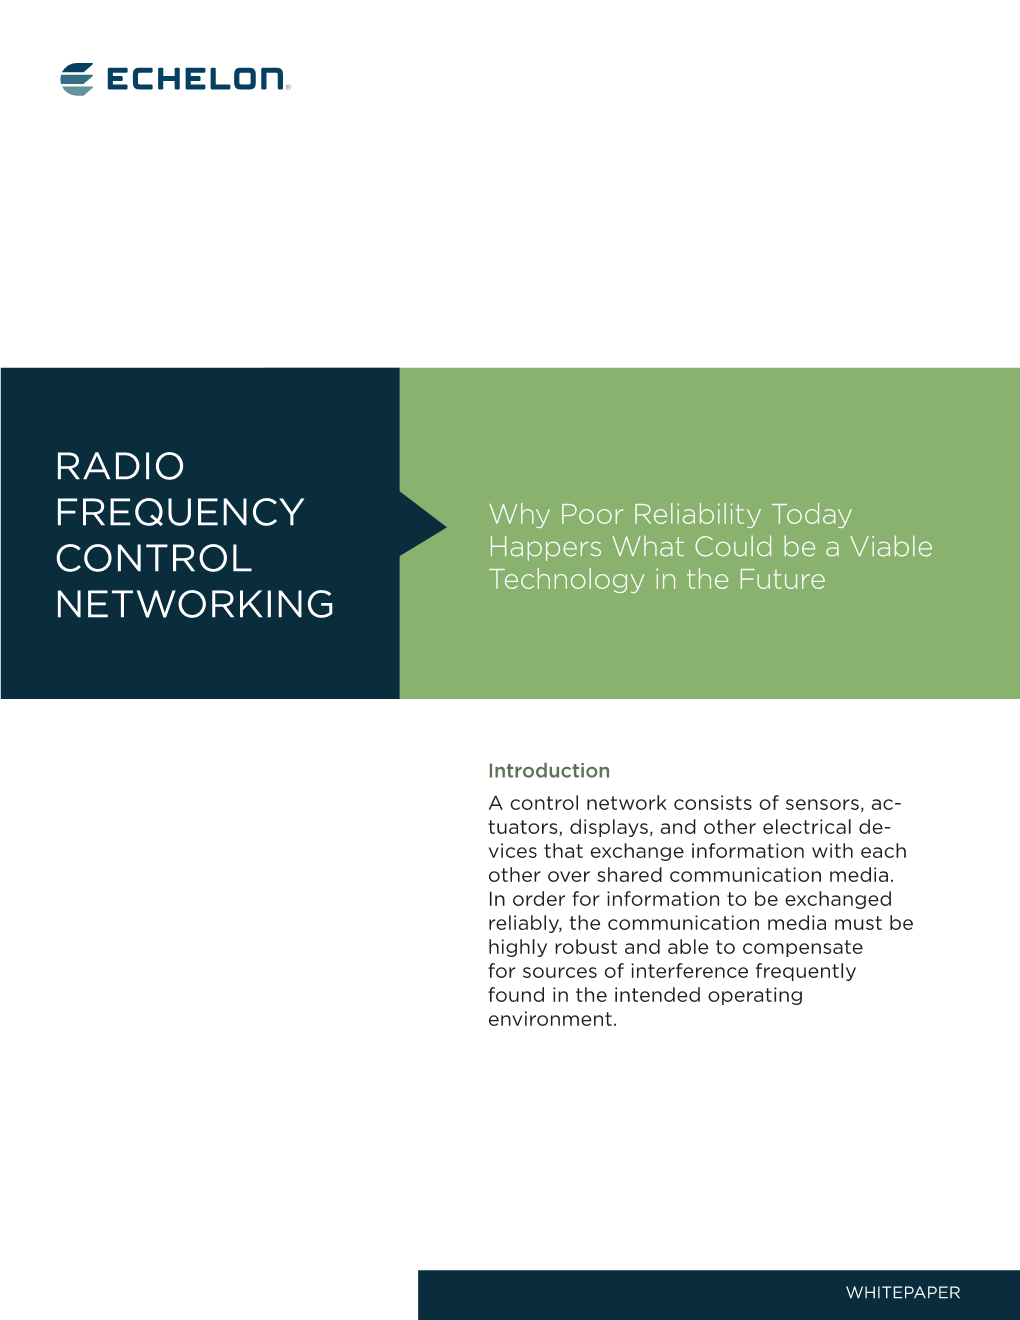 Radio Frequency Control Networking